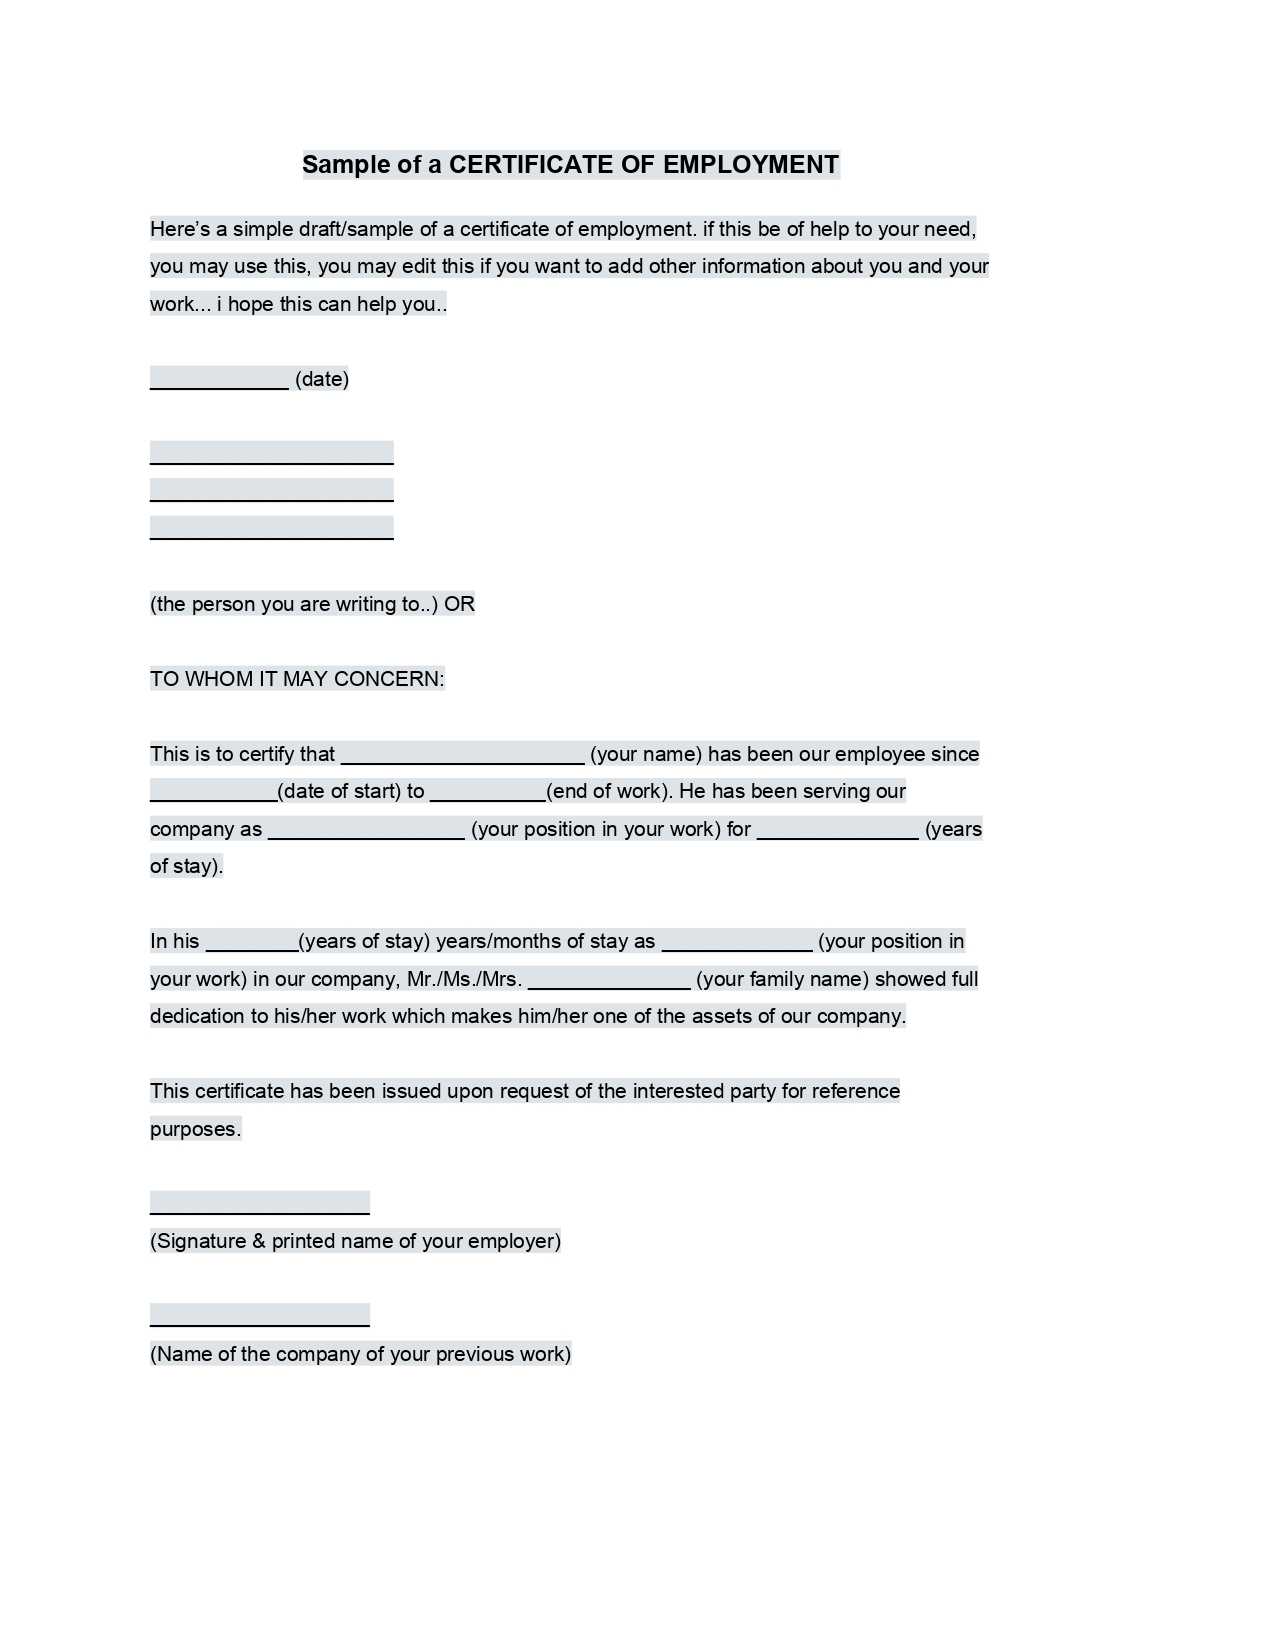 Sample Employment Certificate From Employer – Google Docs In Template Of Certificate Of Employment